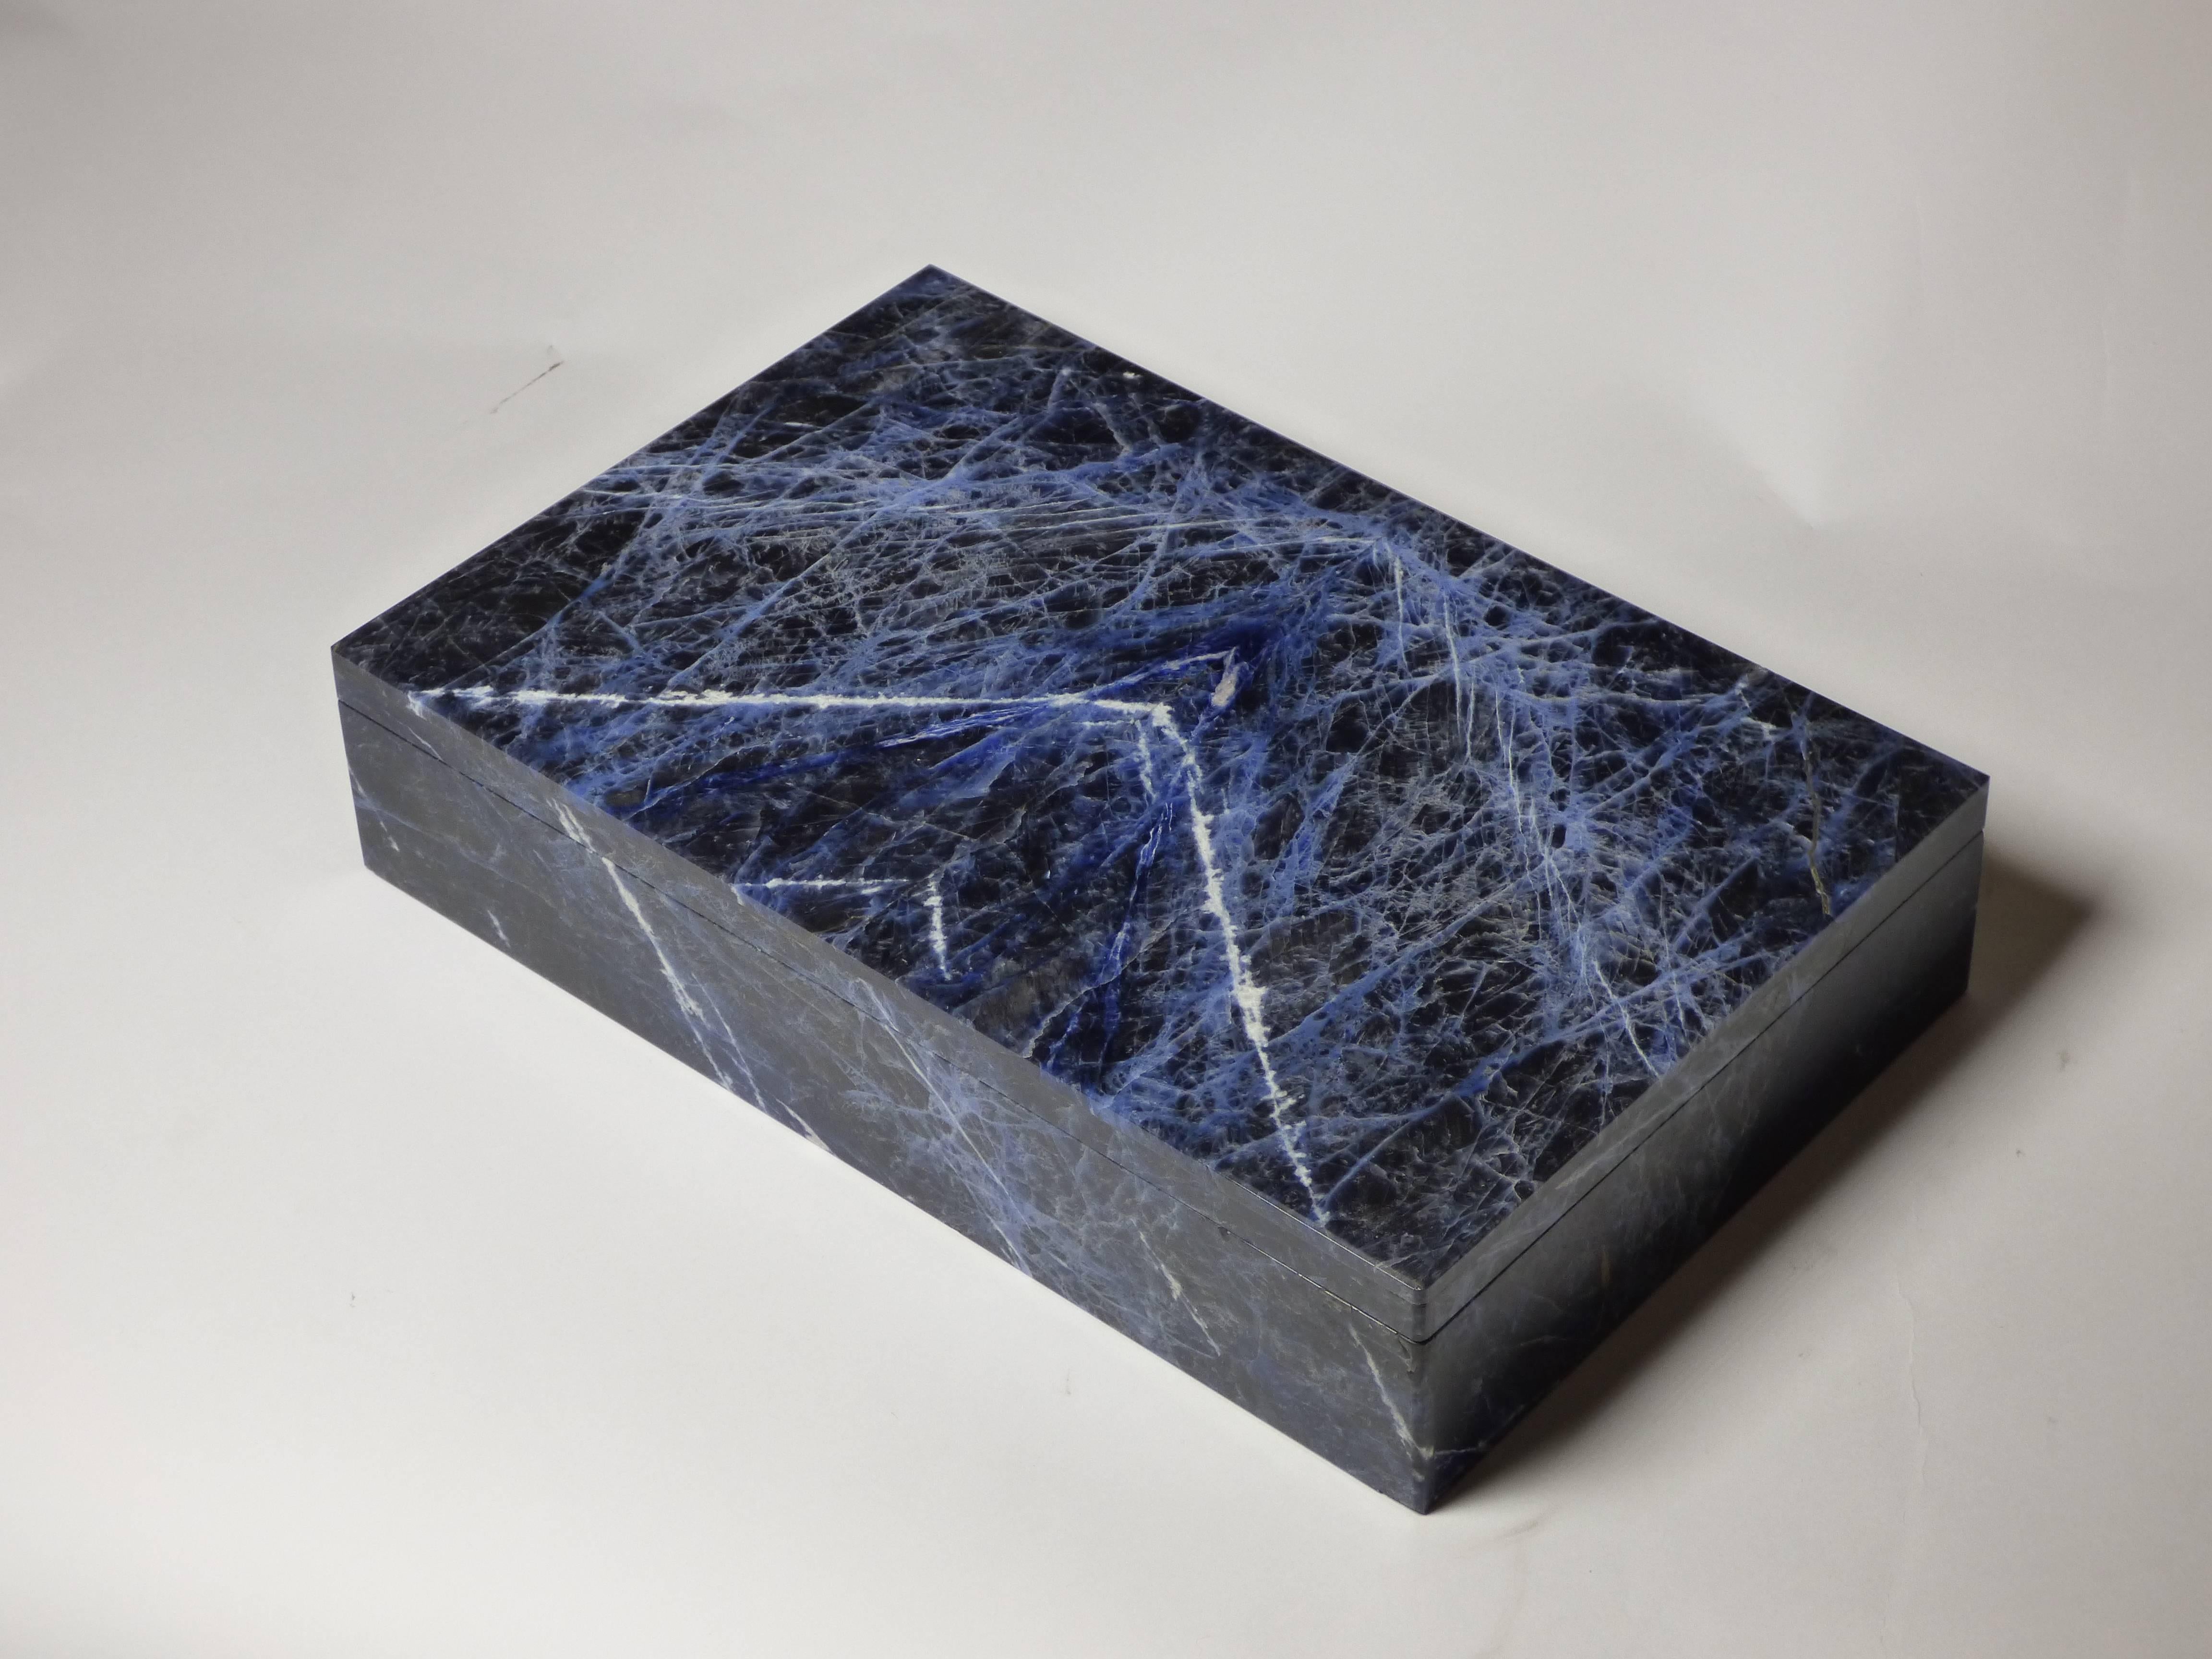 An elegant Sodalite box produced in Italy for Studio Superego with mosaic structure. Unique piece. Original label.

Biography
Superego editions was born in 2006, performing a constant activity of research in decorative arts by offering both